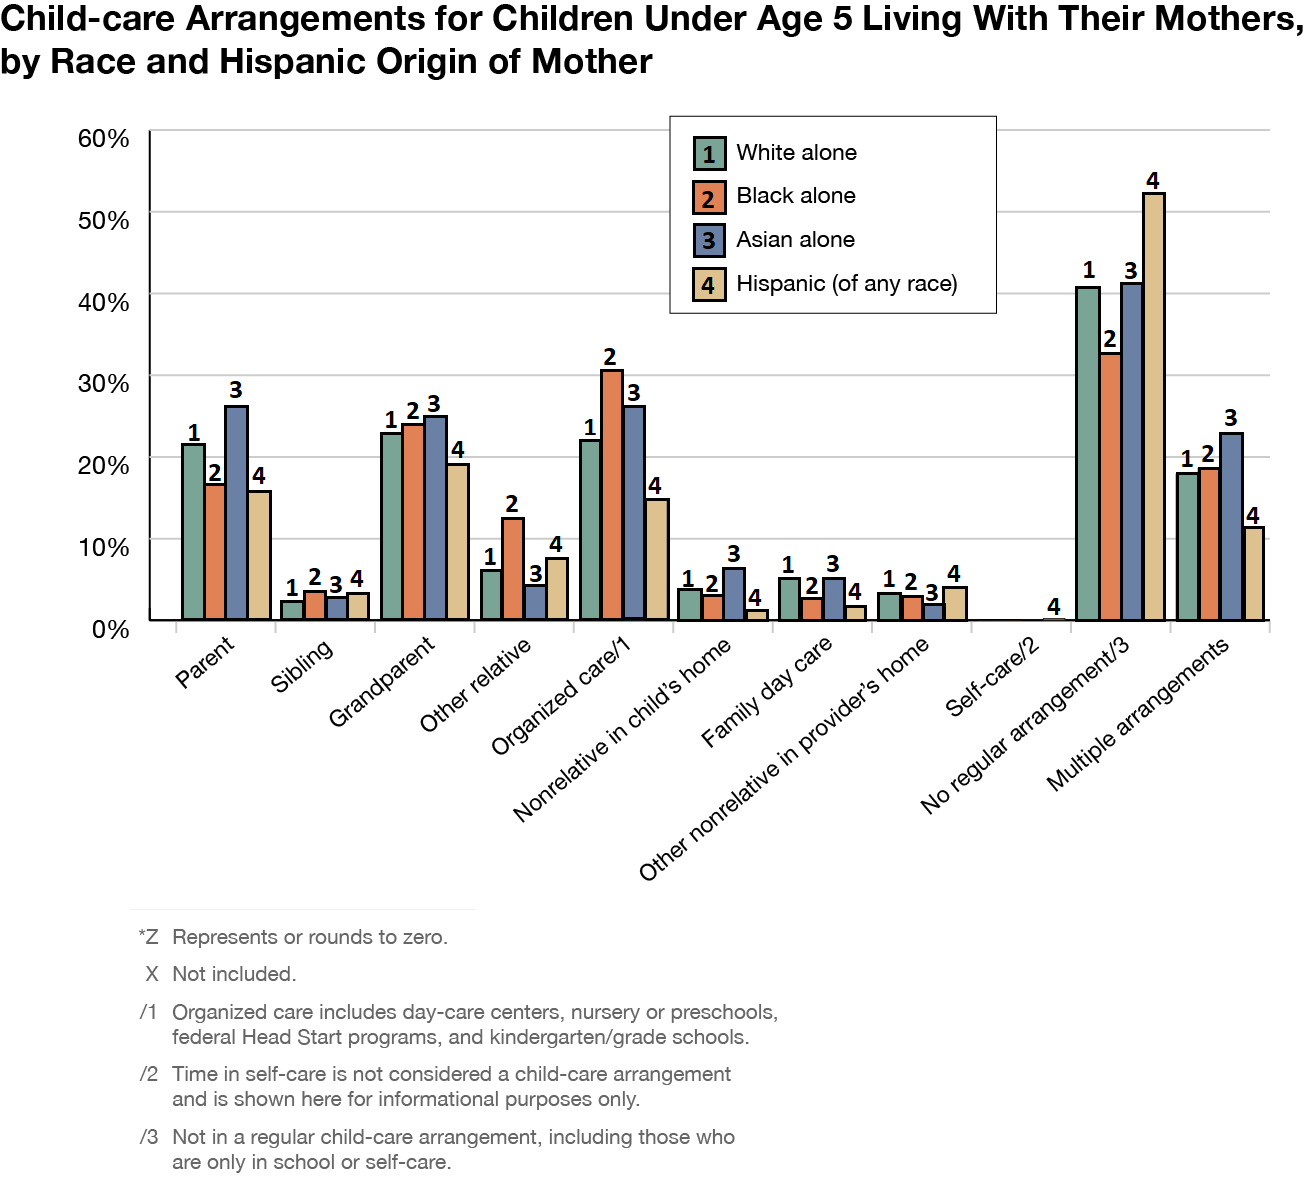 Child-care arrangements for children under age 5 living with their mothers, by race and Hispanic origin of mother. To find the details on the graph please press Image description link below it.